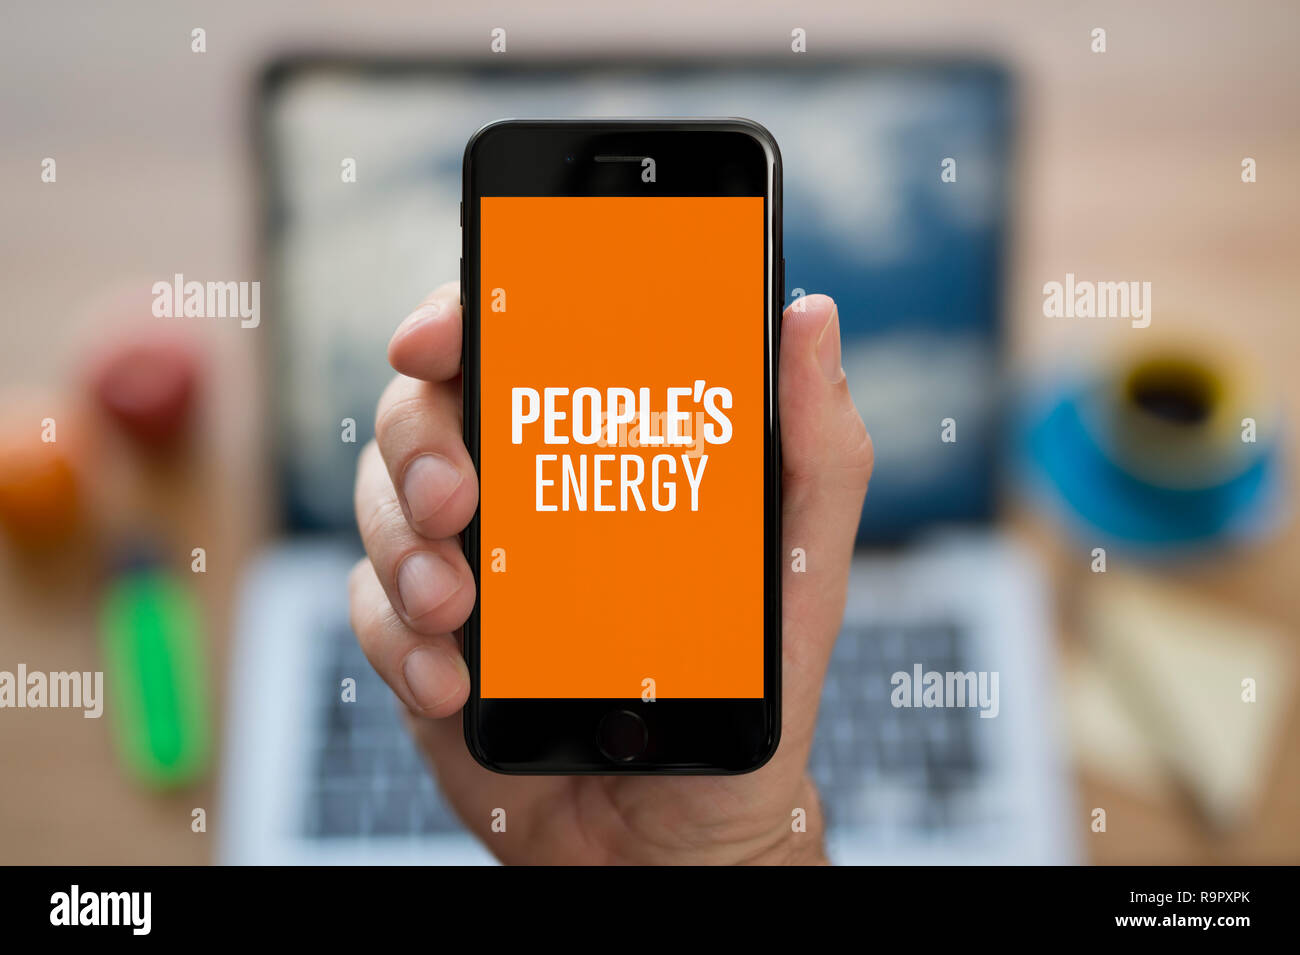 A man looks at his iPhone which displays the People's Energy logo (Editorial use only). Stock Photo